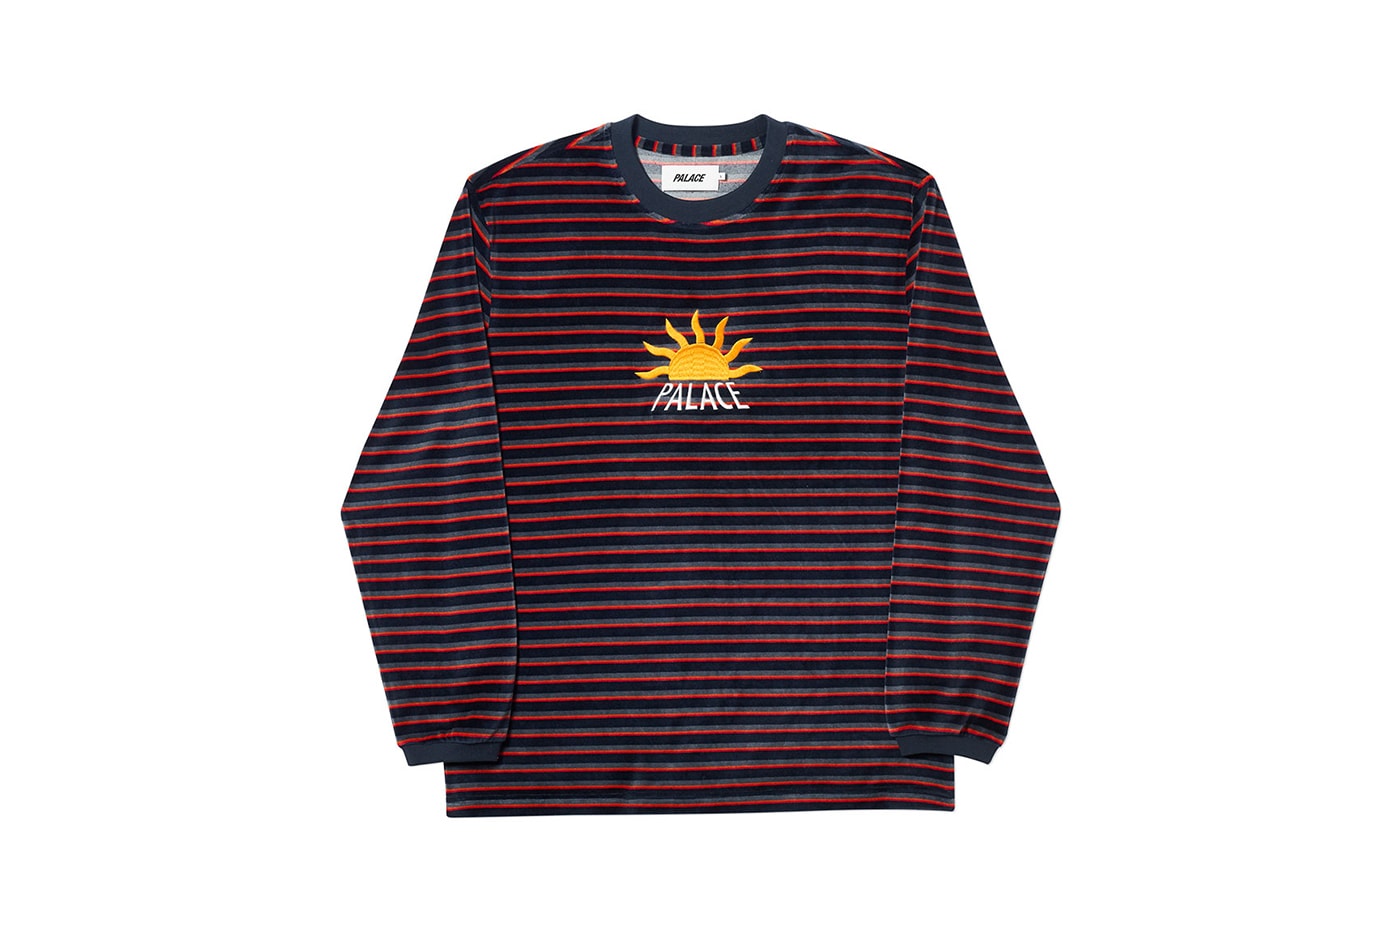 Palace Fall 2019 Collection